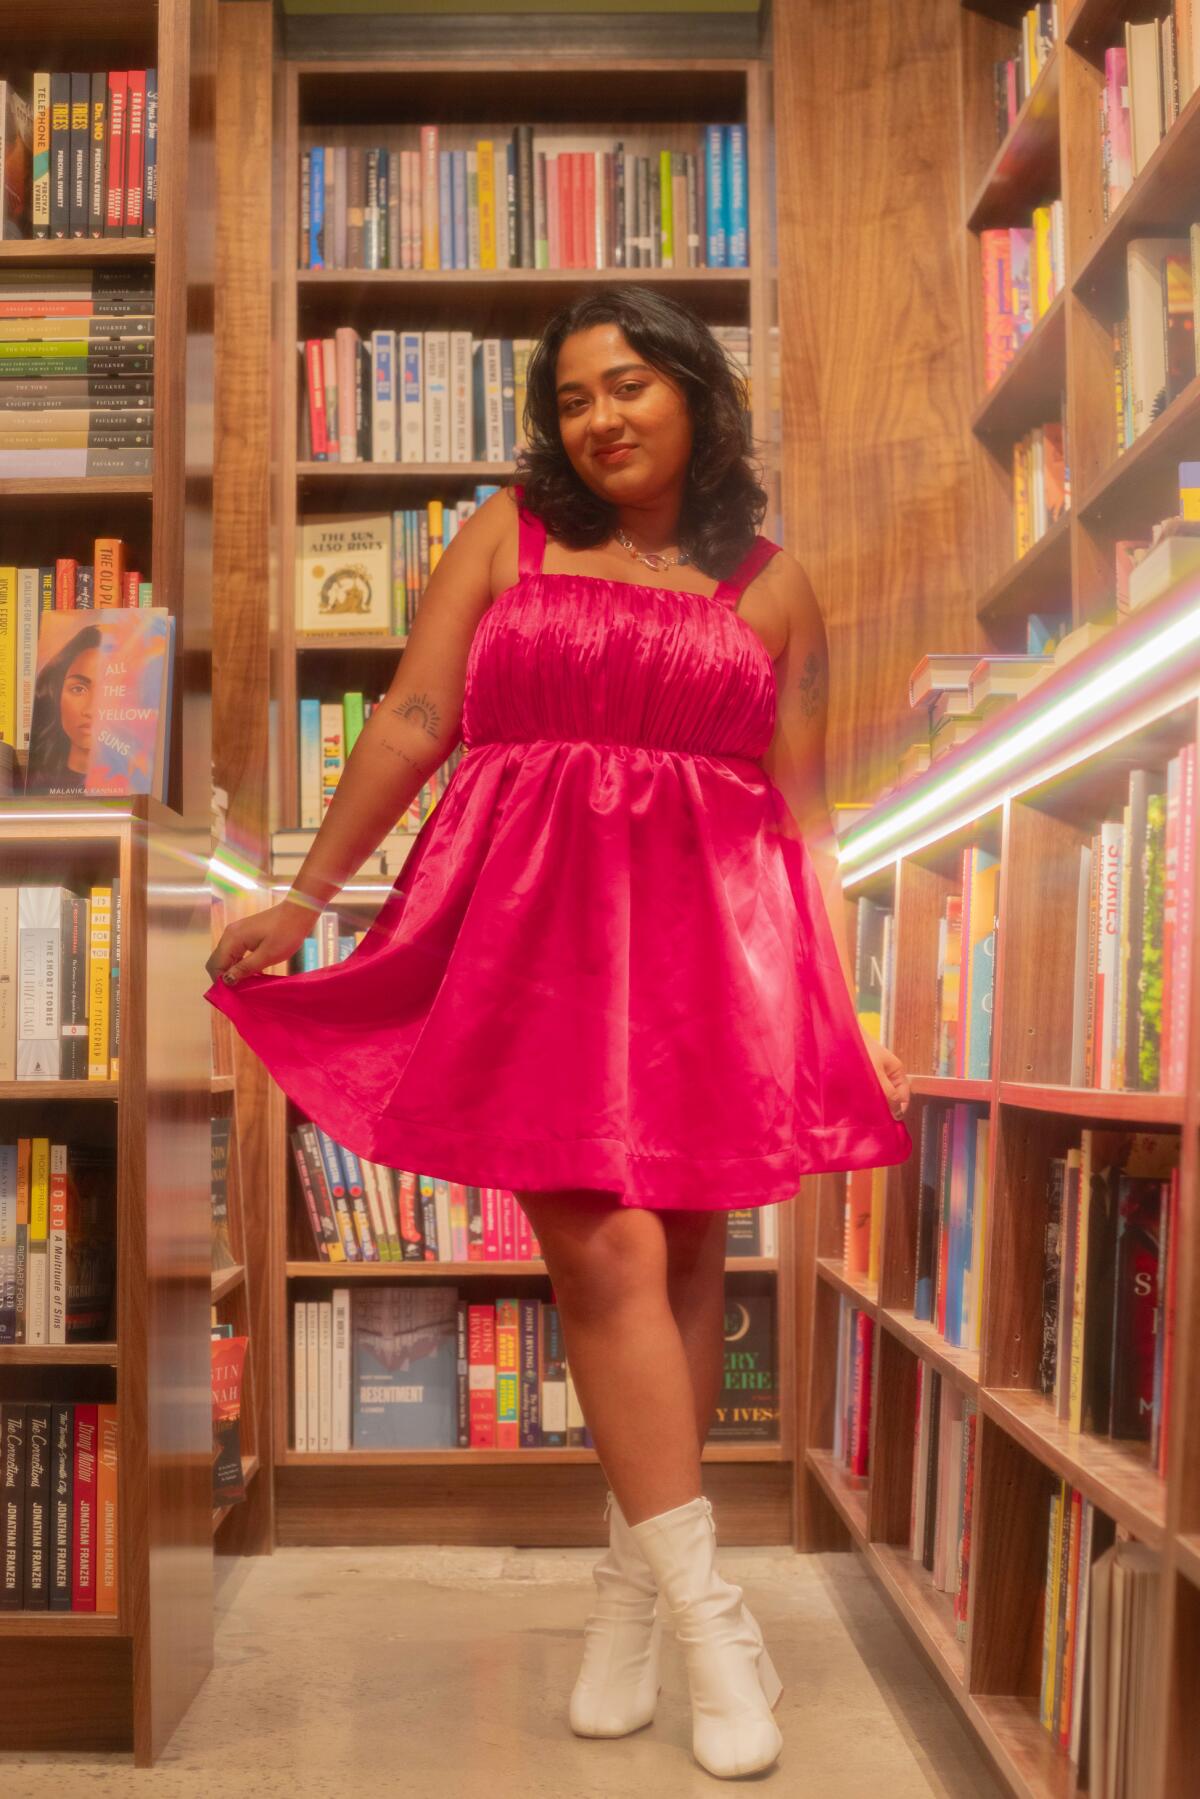 A woman in a pink dress and white boosts poses among shelves full of books.